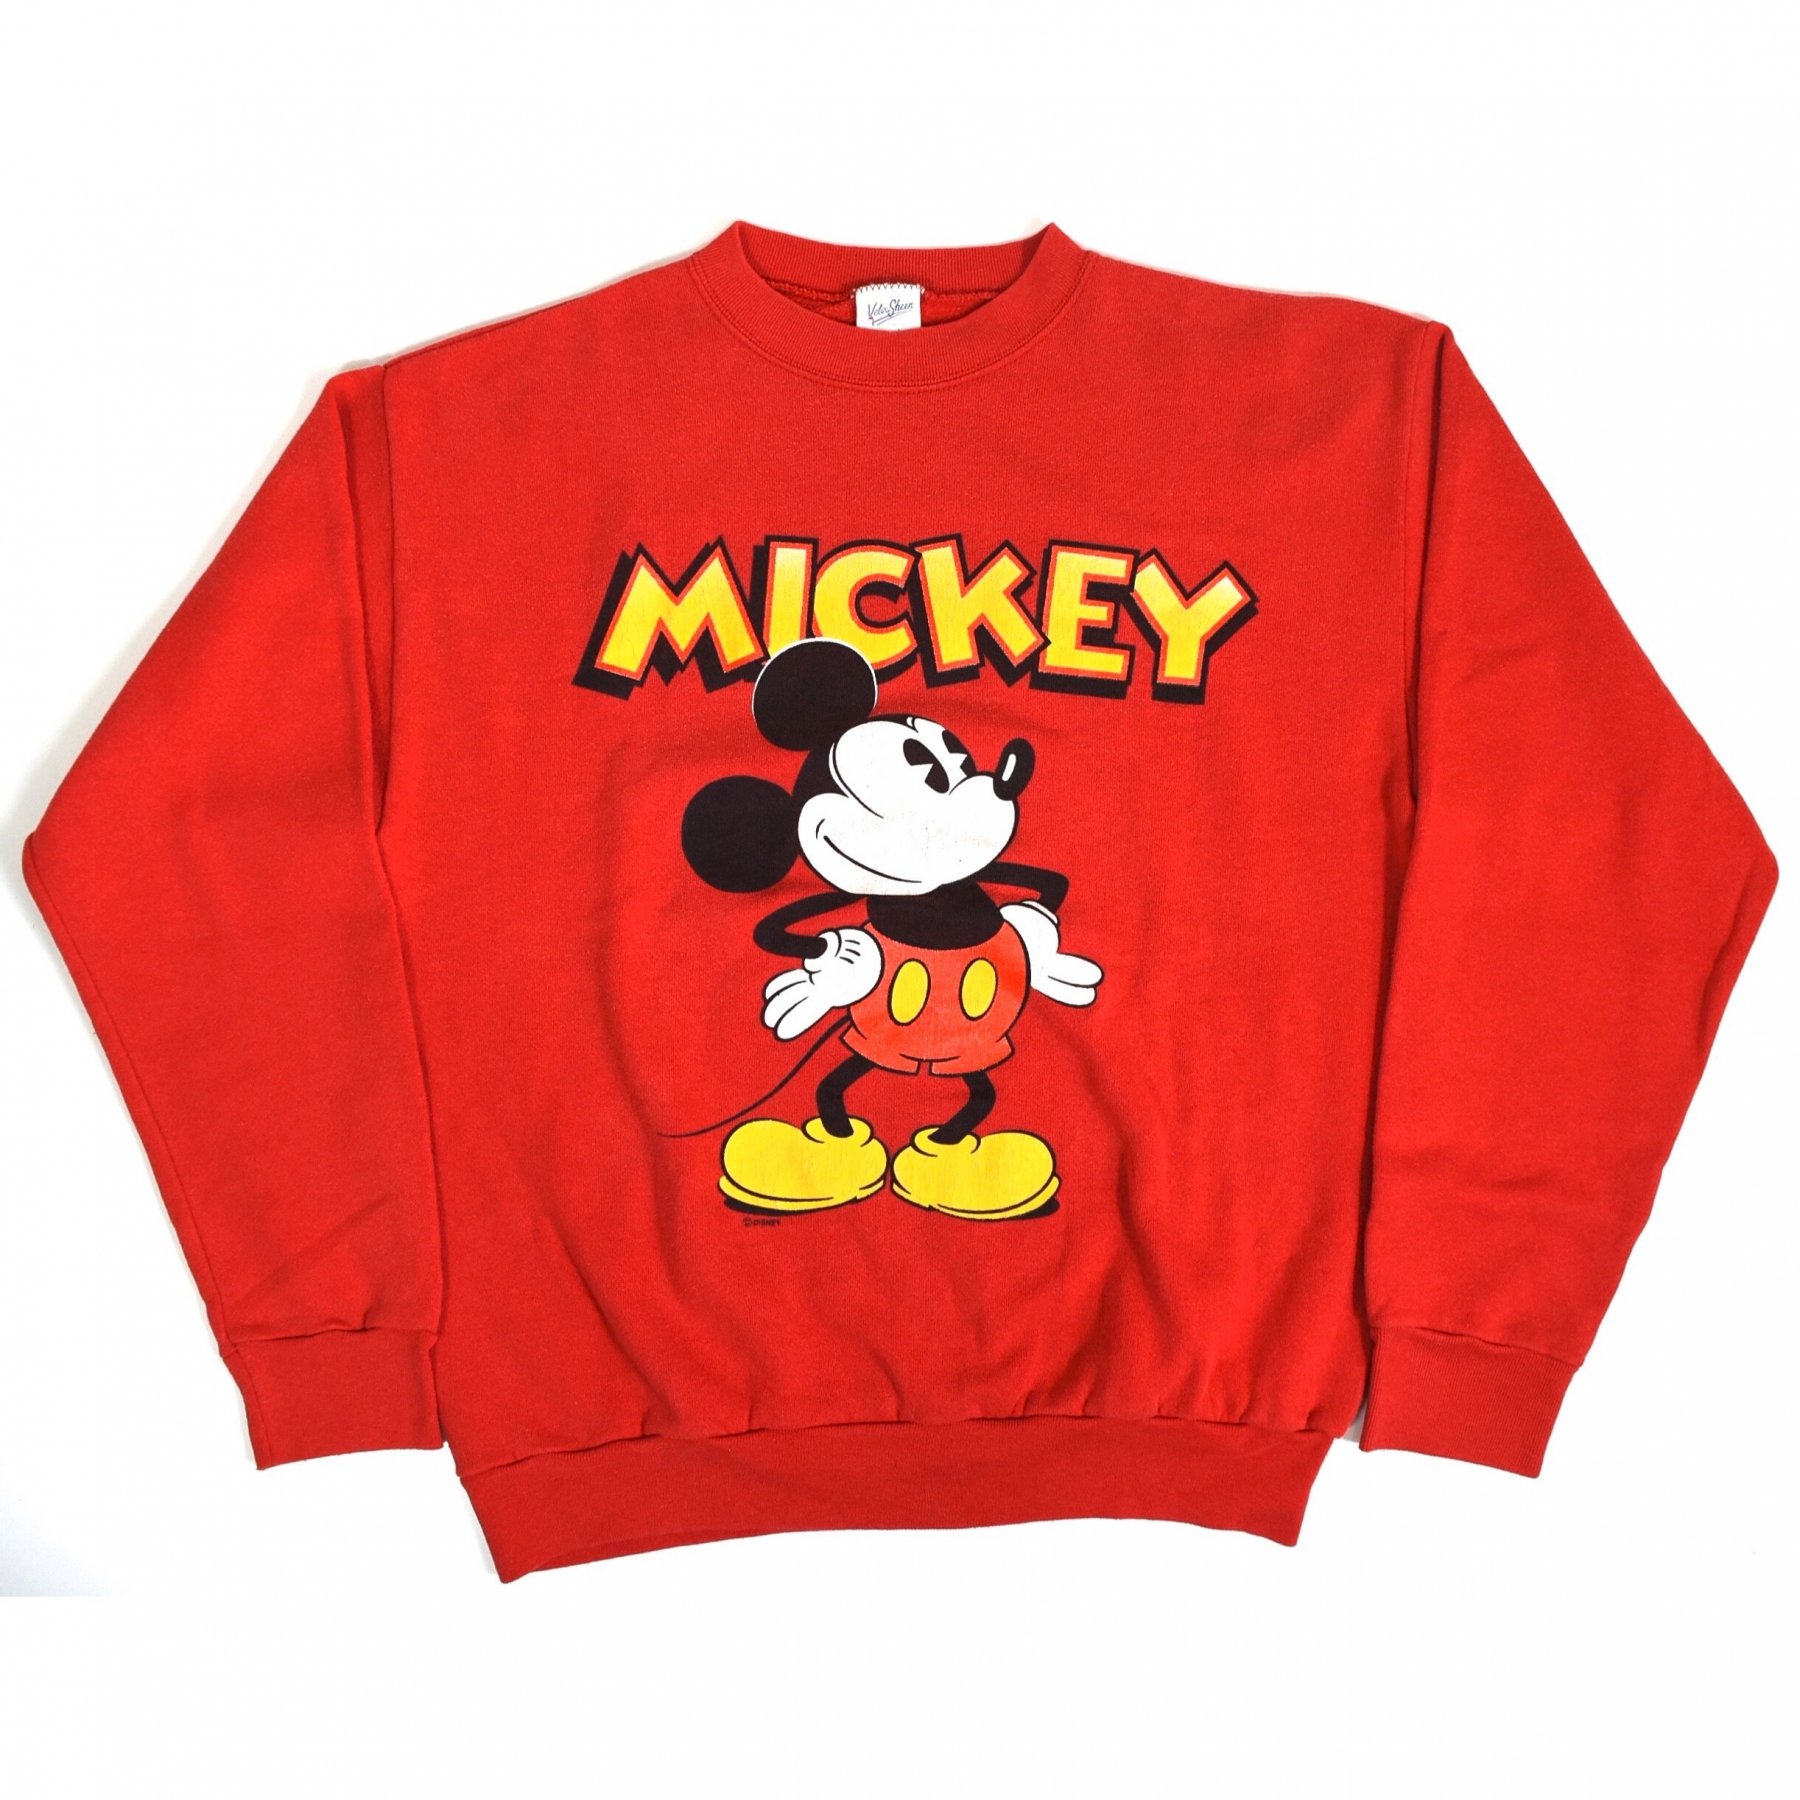 1990s DISNEY MICKEY MOUSE Sweat shirt L MADE IN USA Red